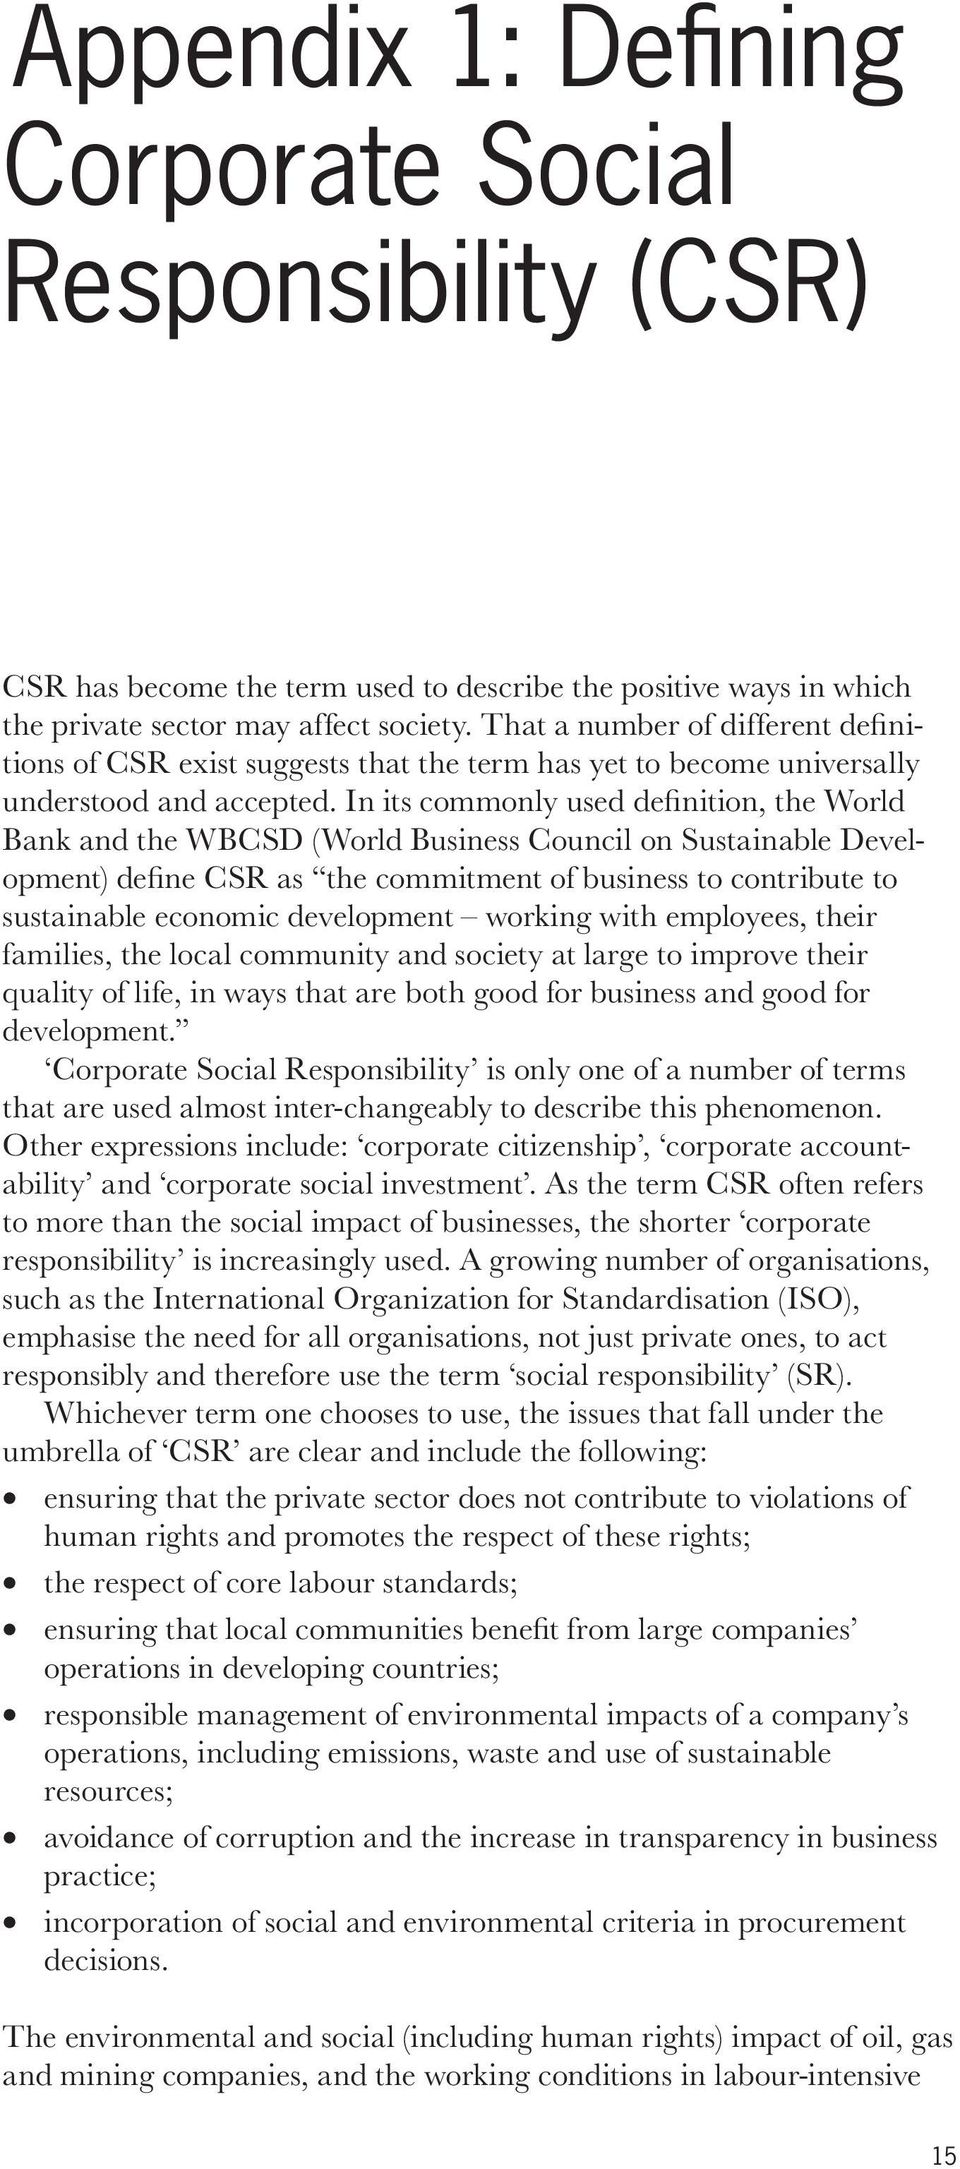 In its commonly used defi nition, the World Bank and the WBCSD (World Business Council on Sustainable Development) defi ne CSR as the commitment of business to contribute to sustainable economic